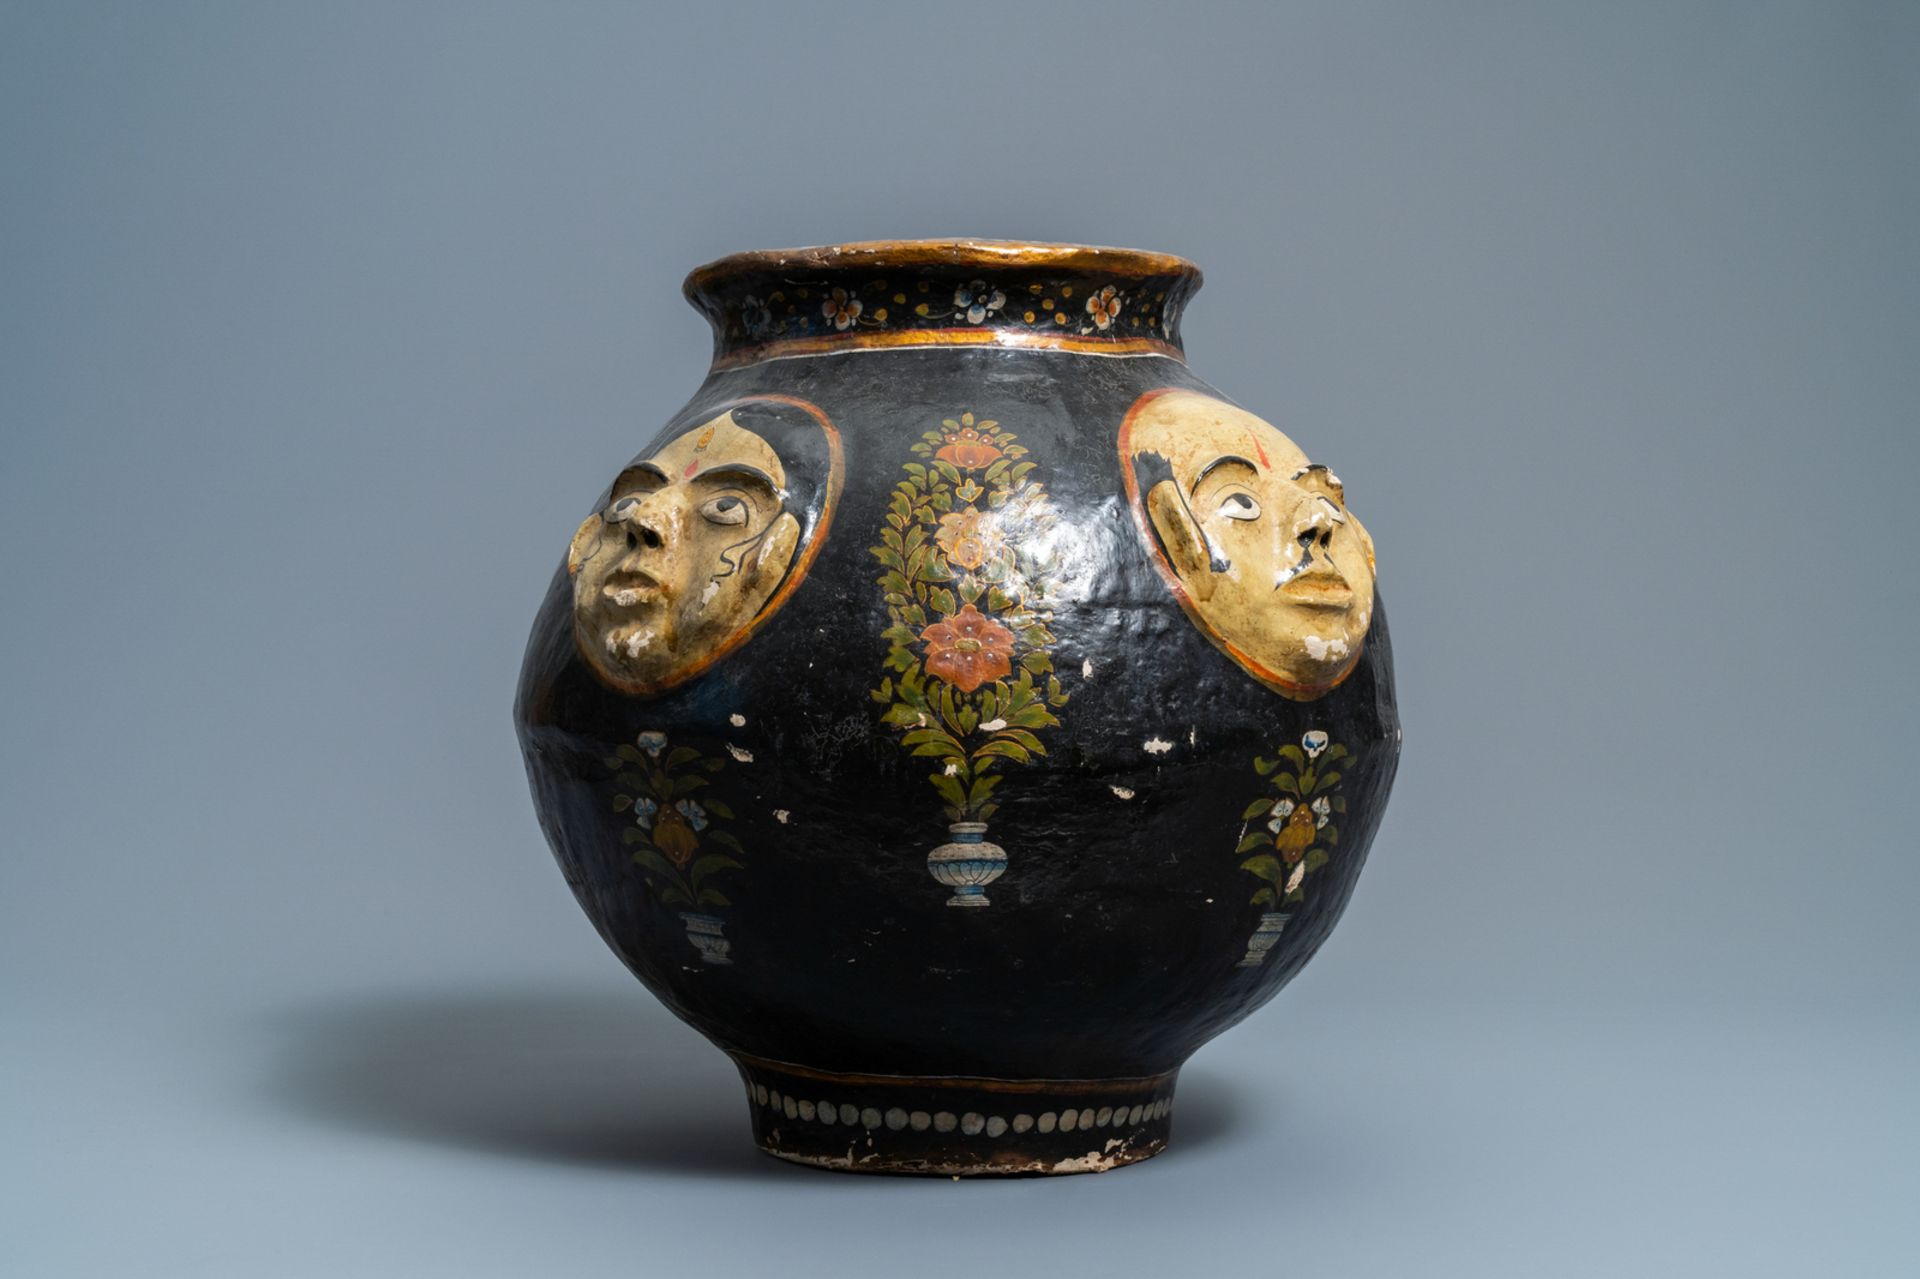 A relief-decorated papier-mache vase with four faces, Kashmir, India, 19th C. - Image 2 of 8